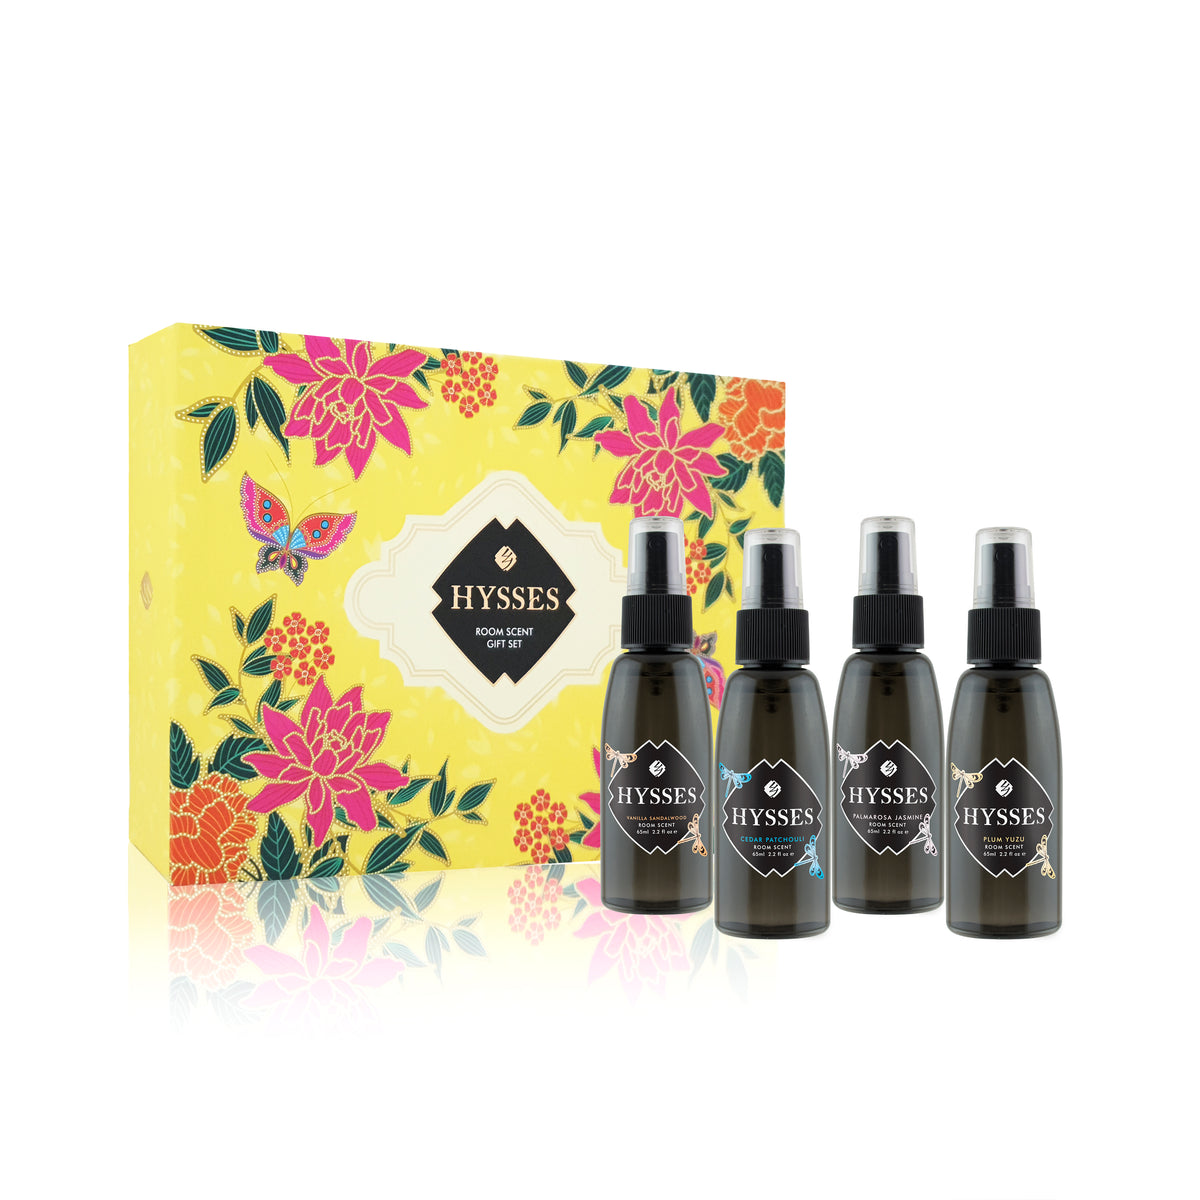 Room Scent Travel Gift Set of 4